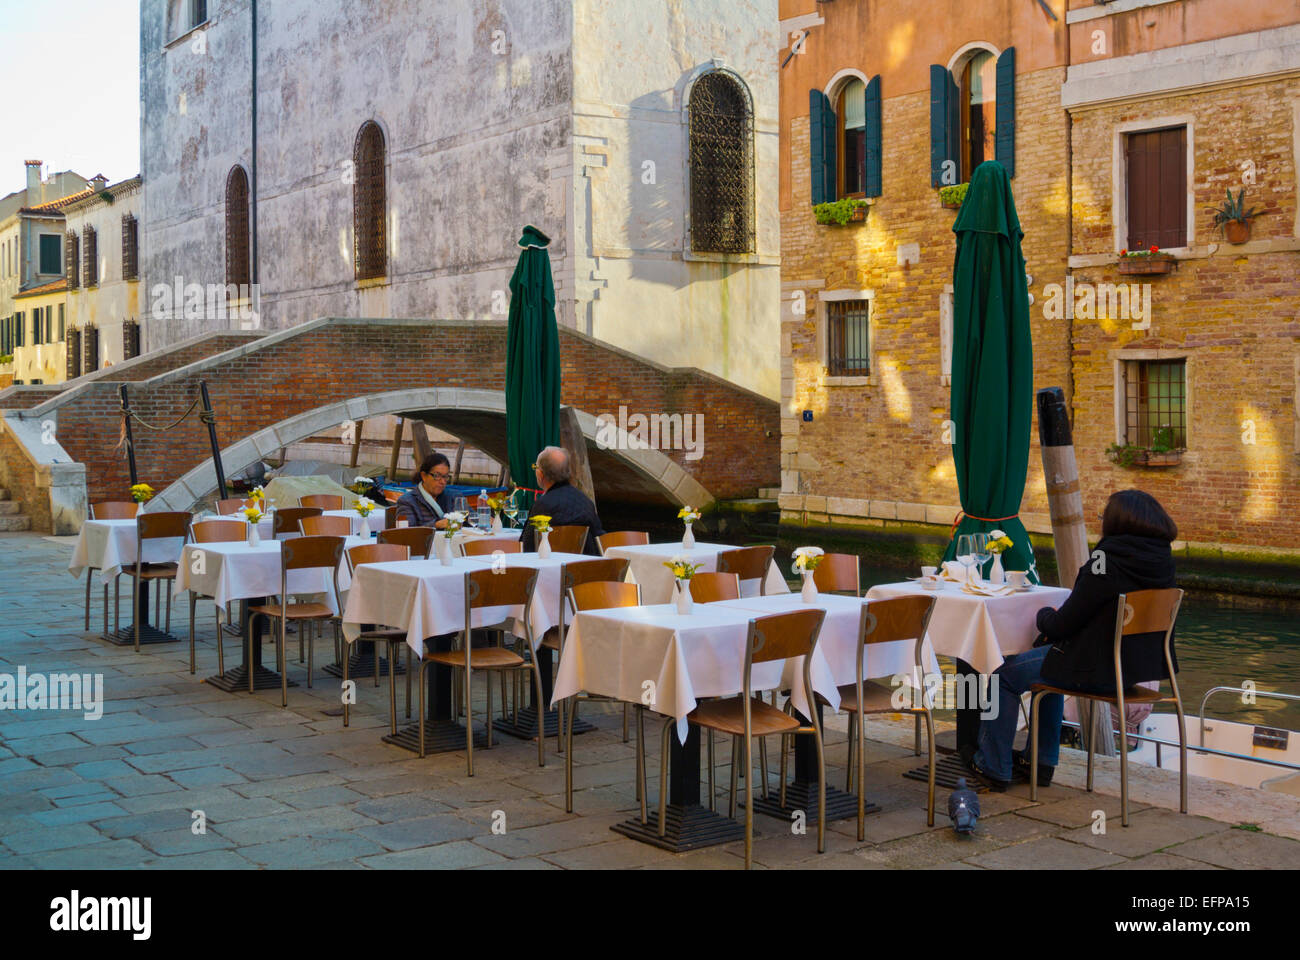 Restaurant terrace by a canal, Cannaregio district, Venice, Italy Stock Photo